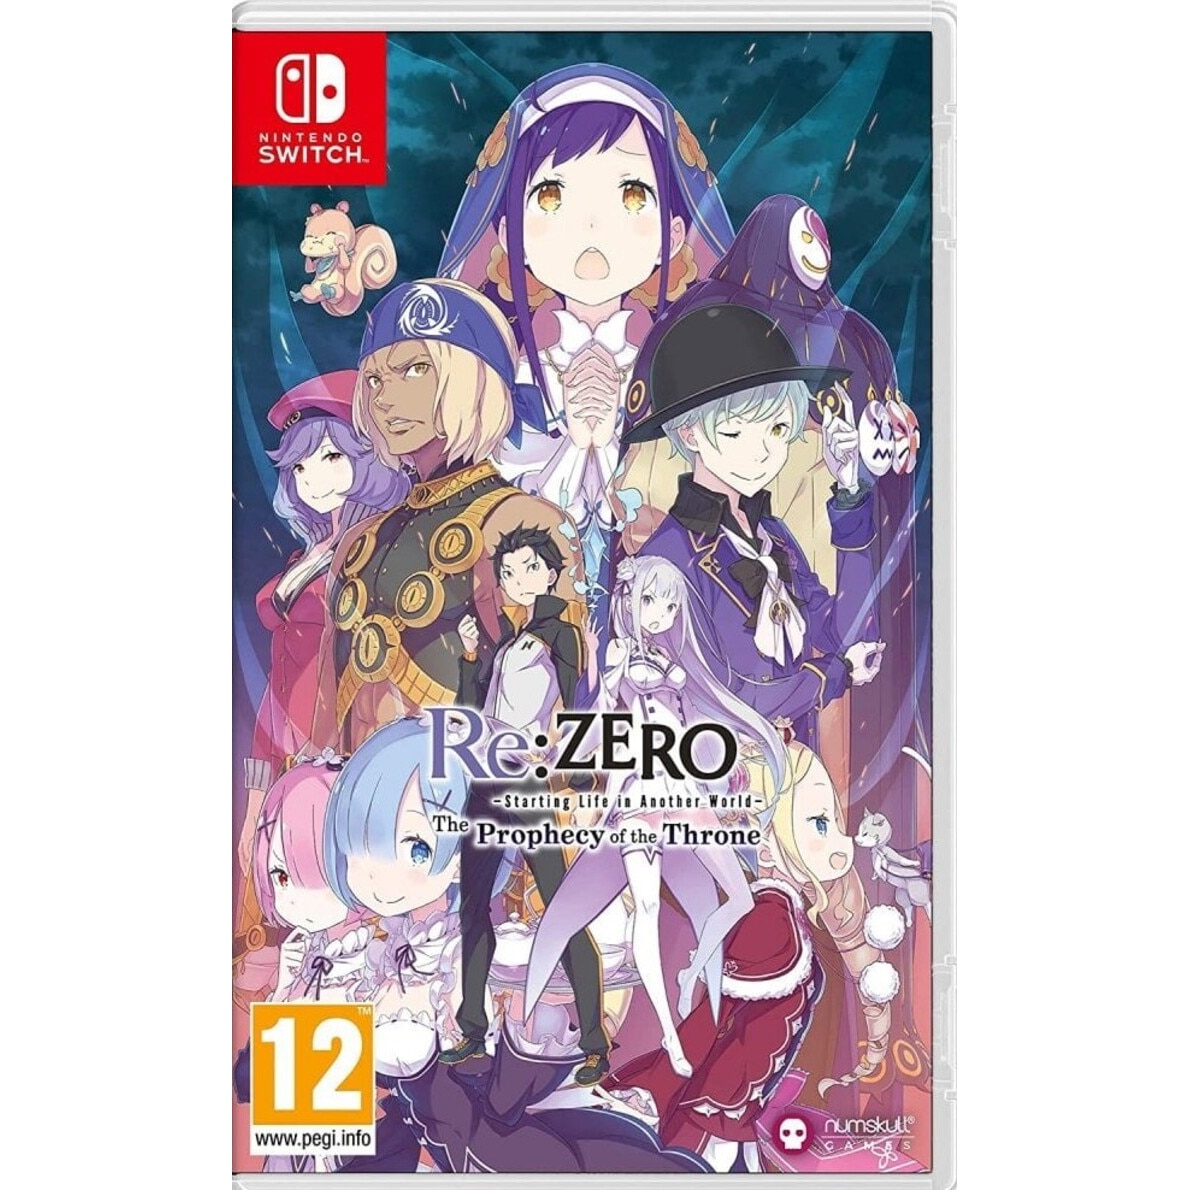 Re:Zero: the Prophecy of the Throne. Re:Zero -starting Life in another World- the Prophecy of the Throne. Re:Zero – starting Life in another World: the Prophecy of the Throne русификатор. Switch restart. Re switched